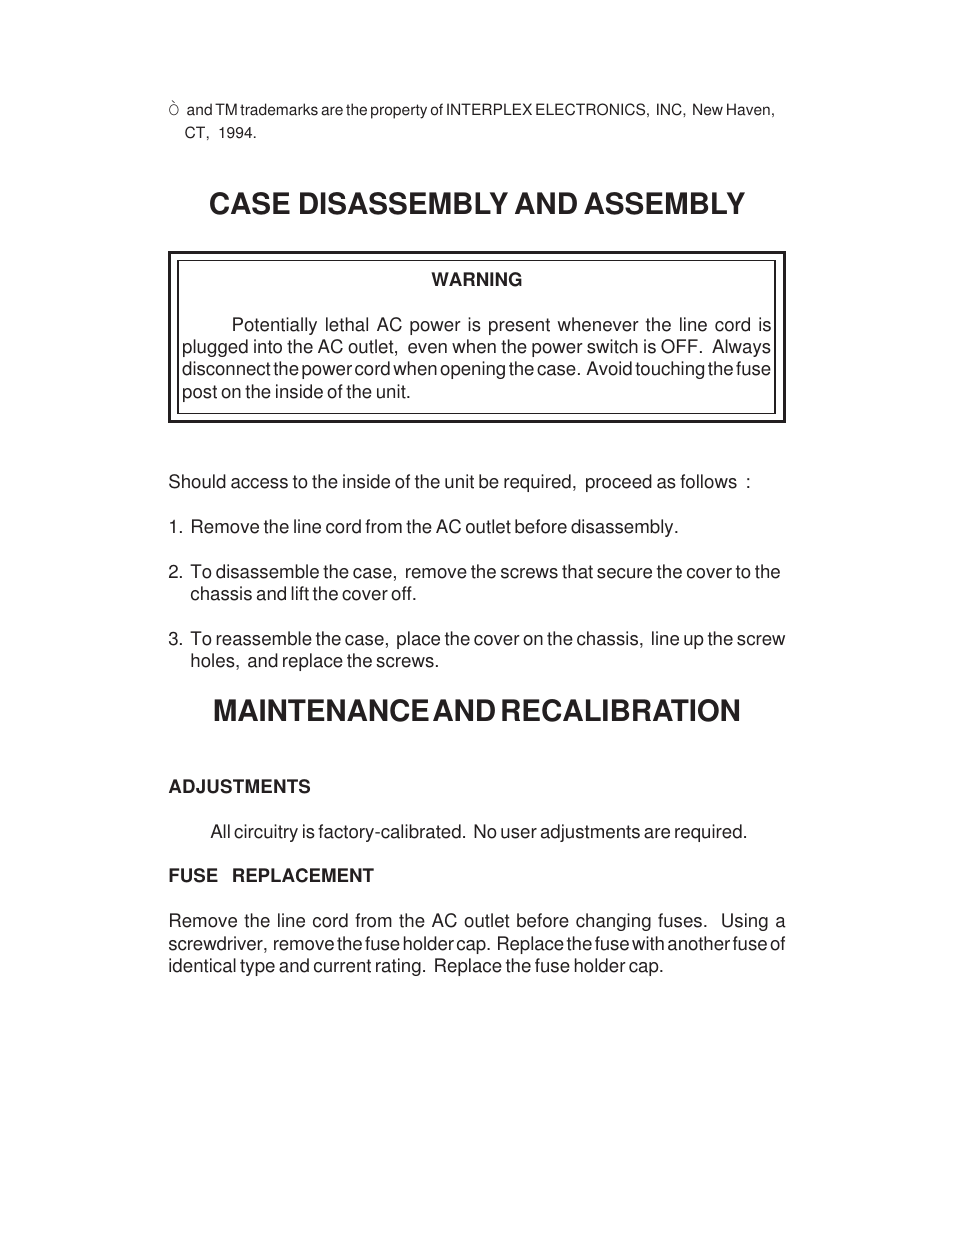 Case disassembly and assembly, Maintenance and recalibration | Global Specialties 1504 User Manual | Page 11 / 20